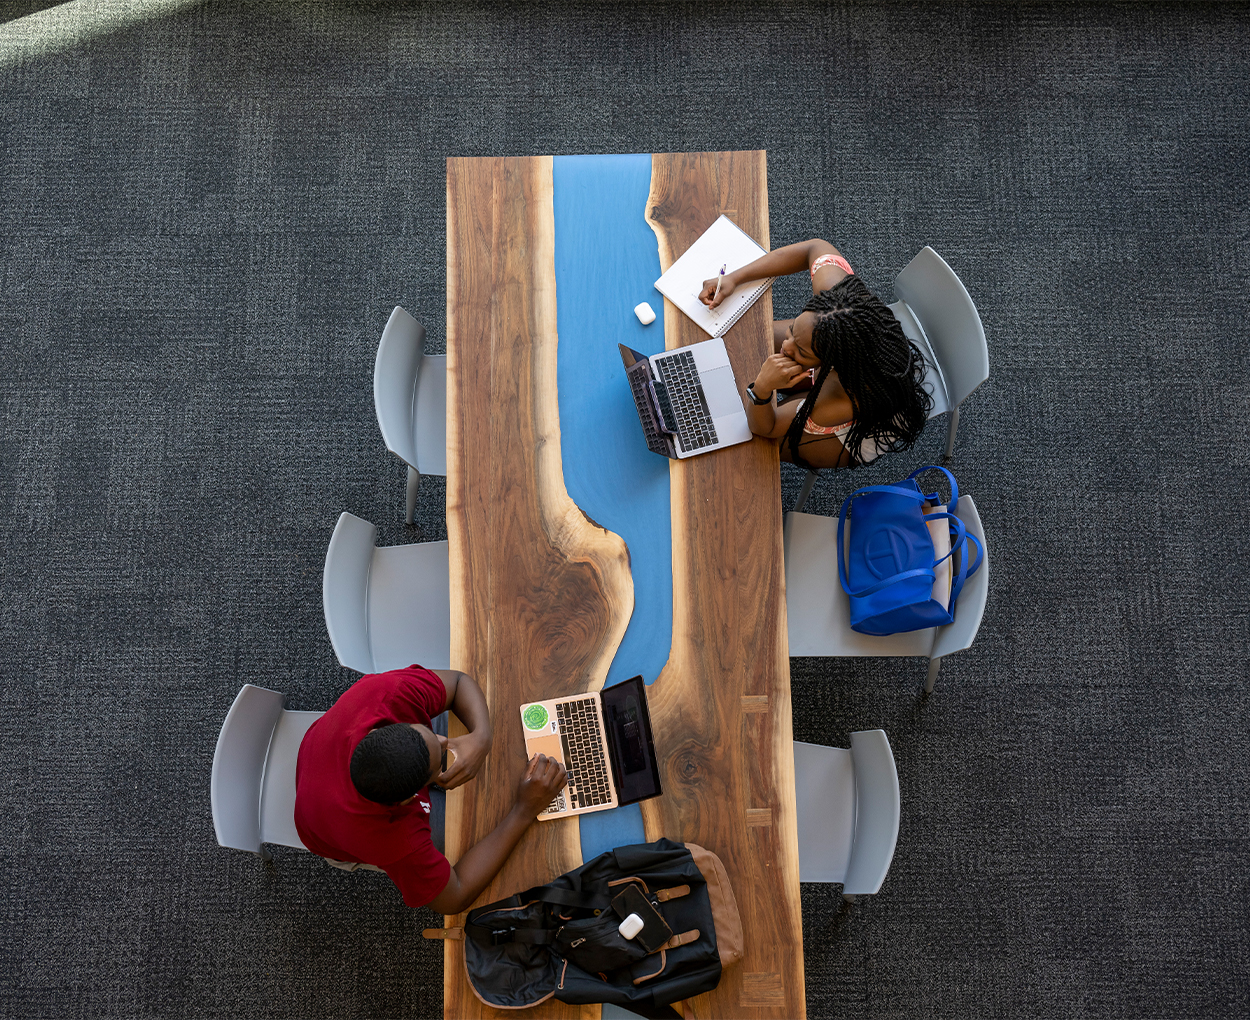 Two students sit across from one another at a wooden table, as seen from above.